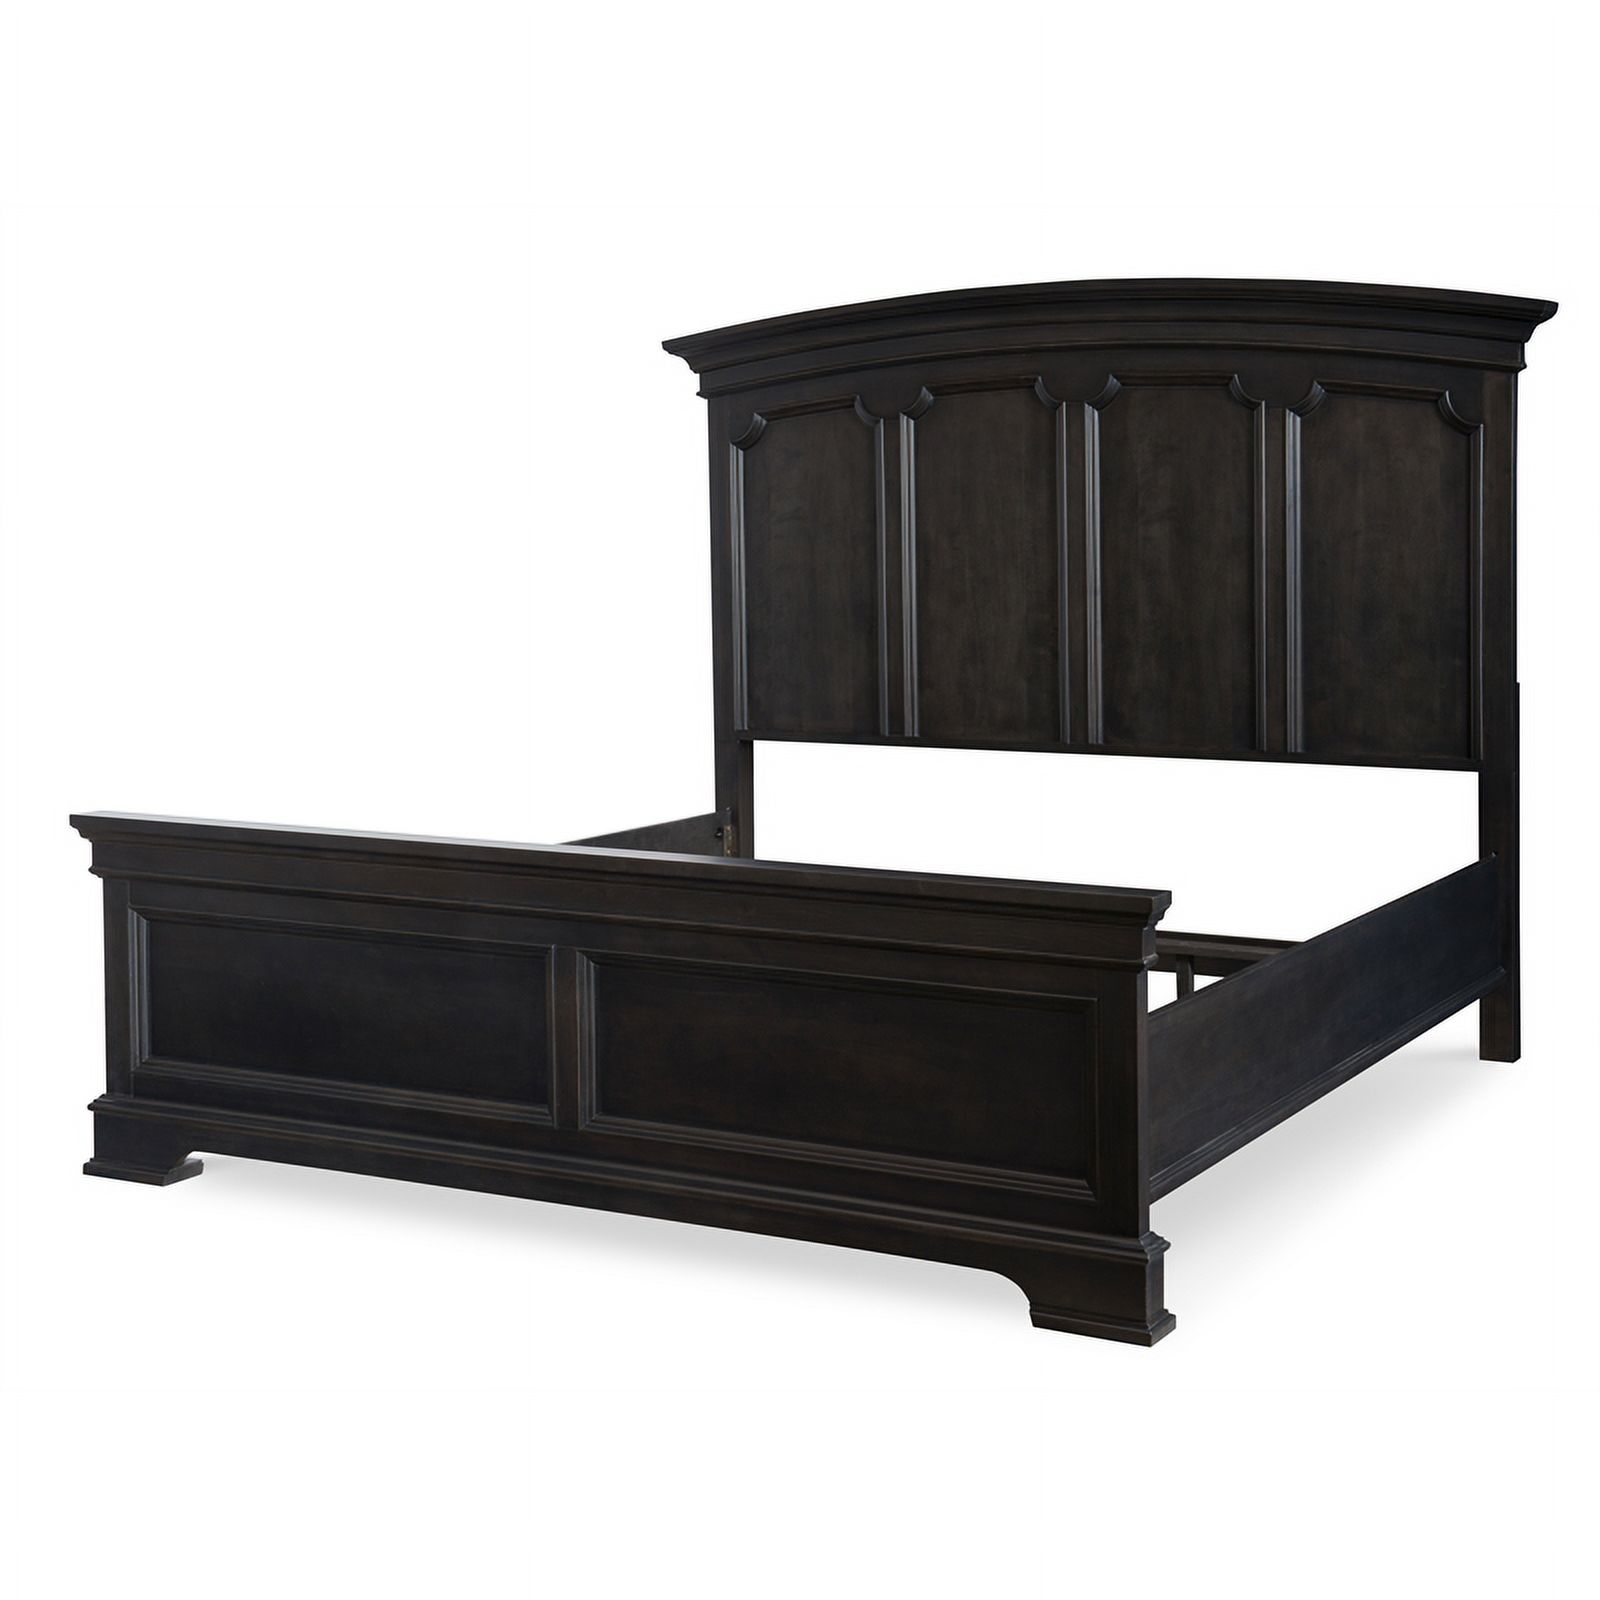 Townsend King / California King Wood Sepia Charcoal Arched Panel Headboard - image 4 of 5